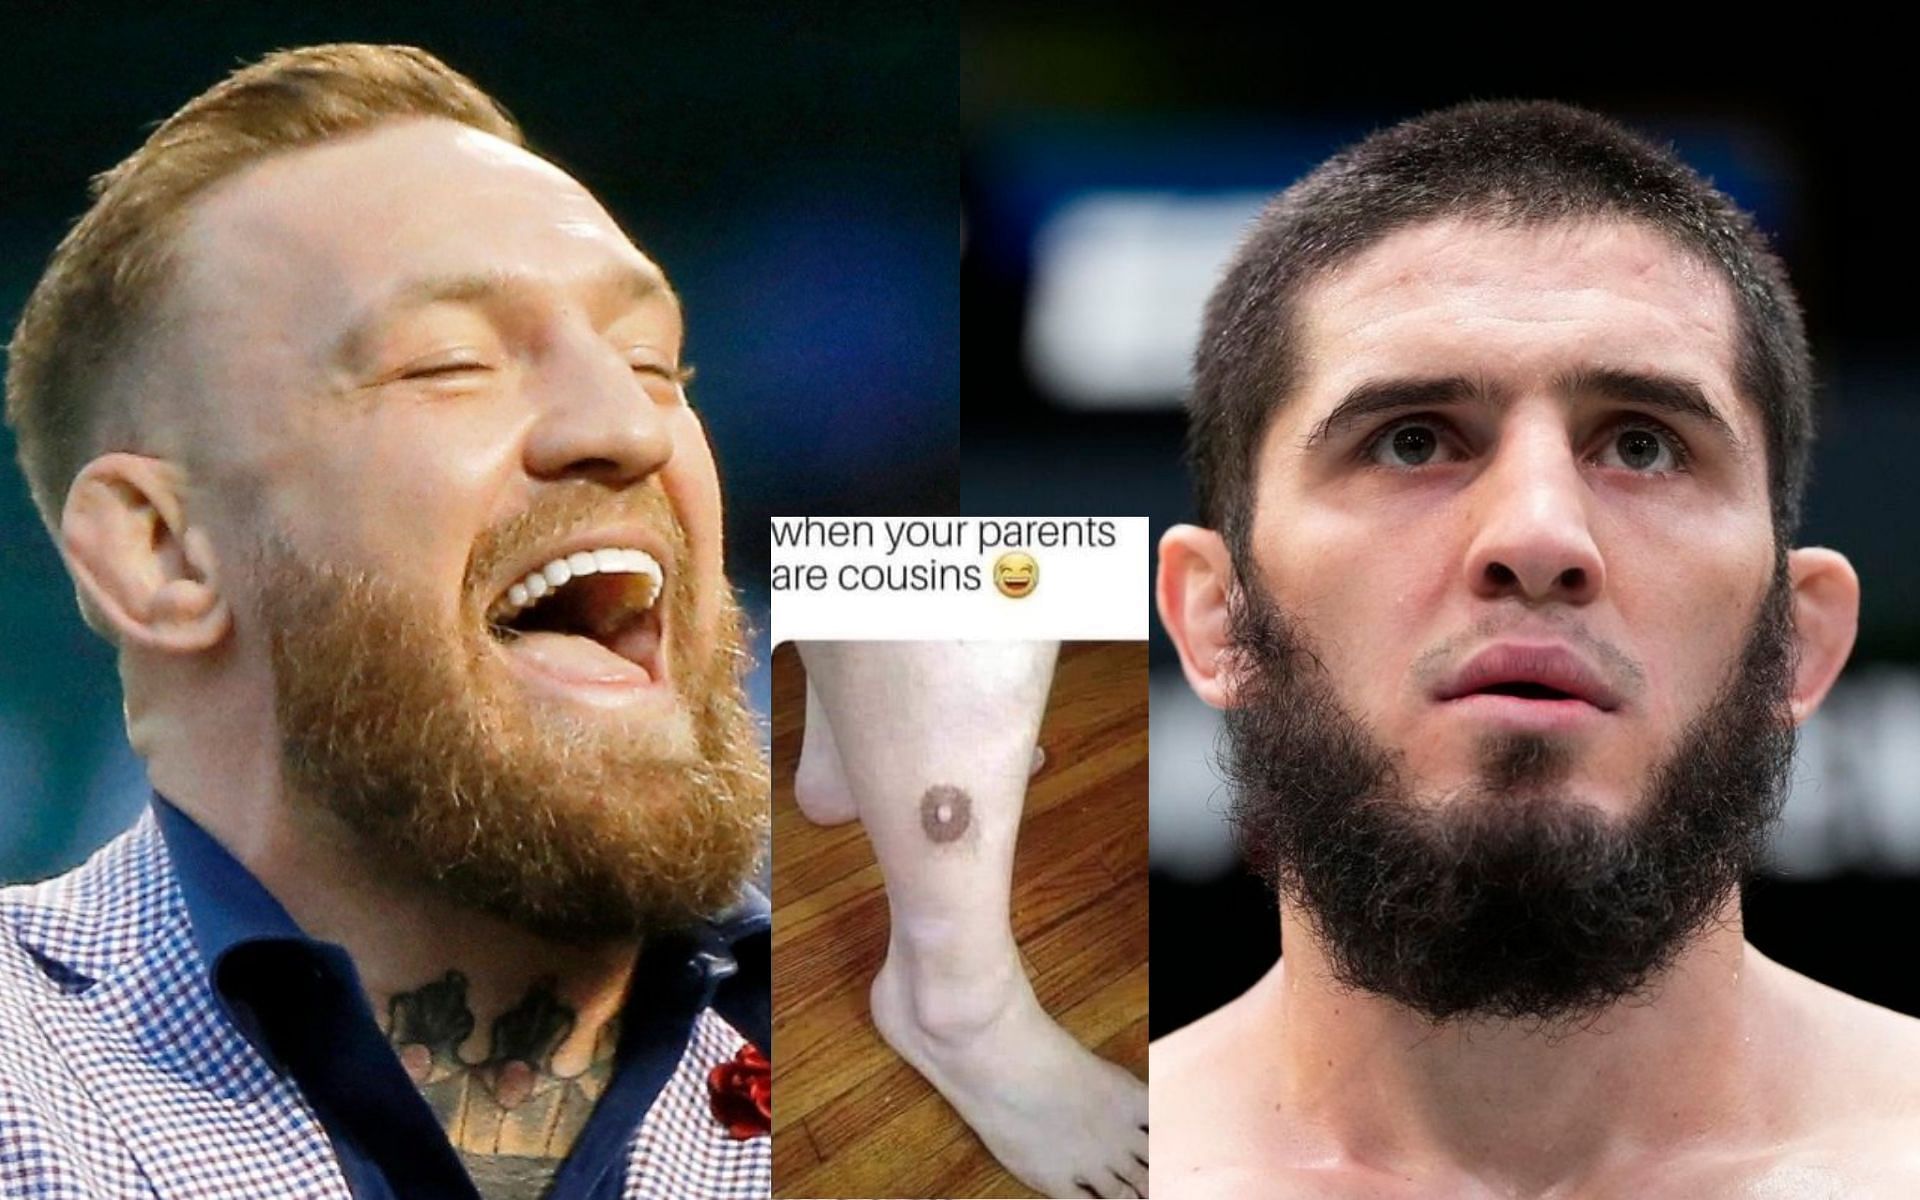 Conor McGregor (left. Image credit: Jon Durr-USA TODAY Sports), Islam Makhachev (right. Image credit: Chris Unger/Zuffa LLC)